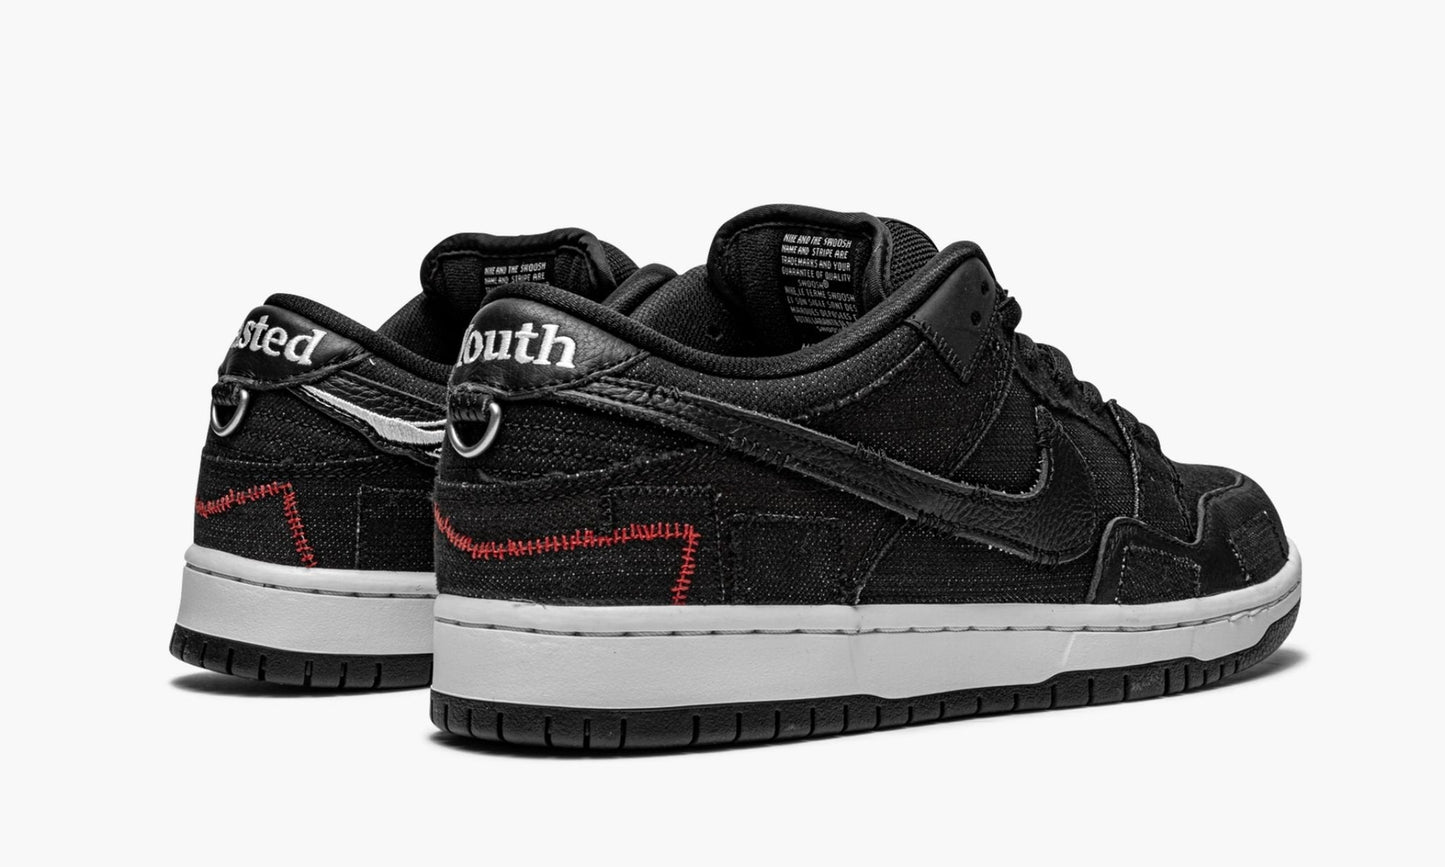 SB Dunk Low "Wasted Youth - Special Box"